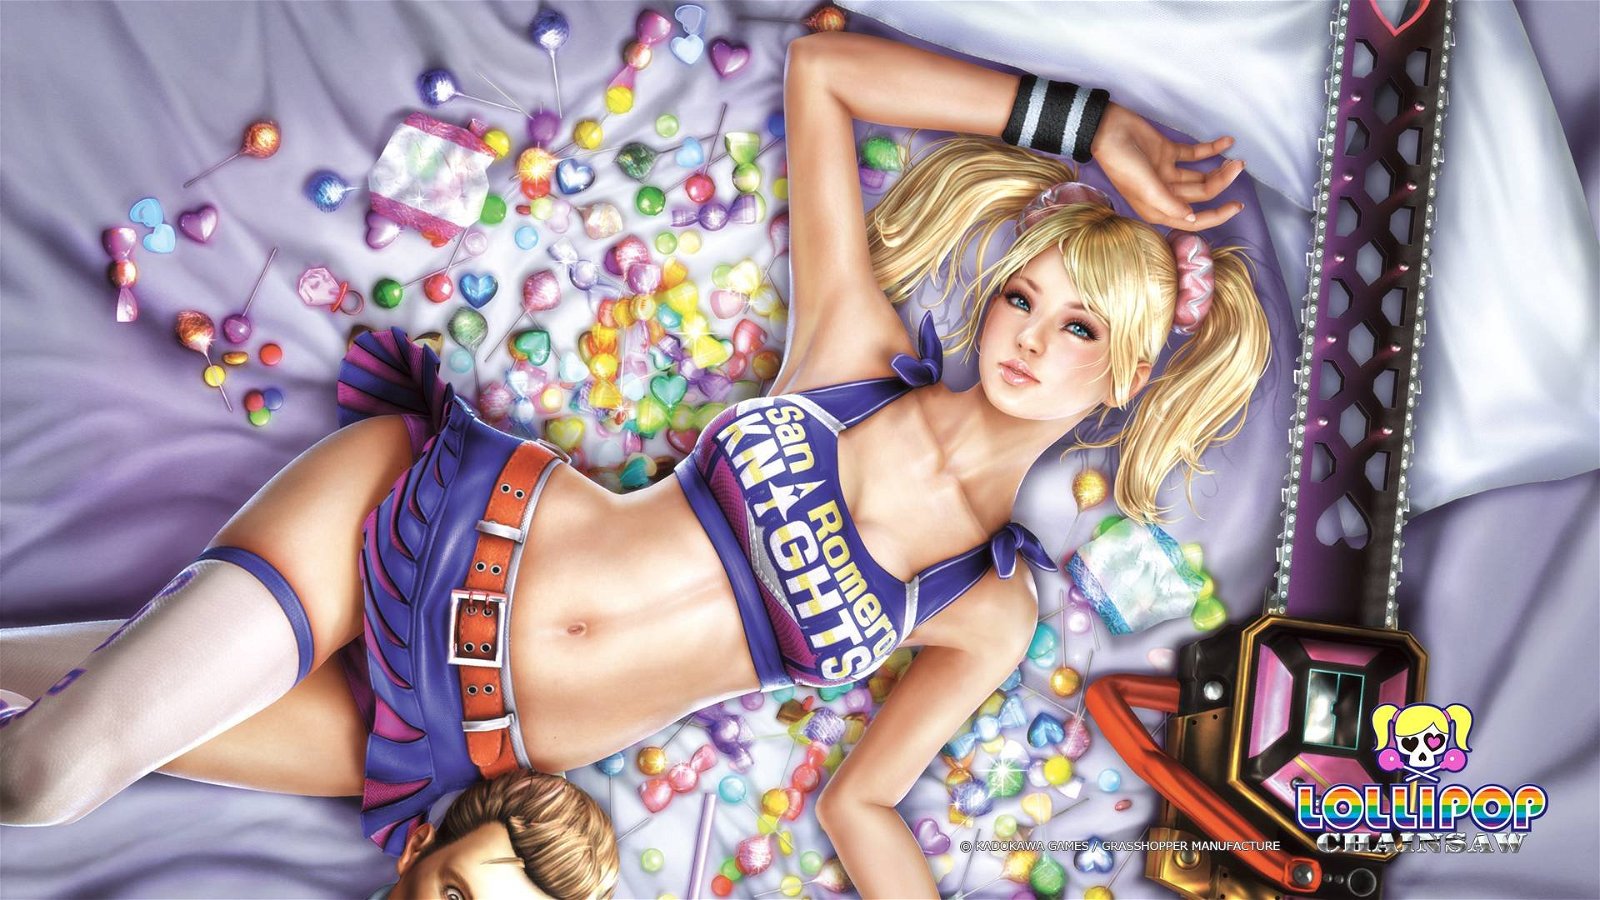 Anyone excited for the lollipop chainsaw remake? ✨🍭⛓🌸 : r/fanart